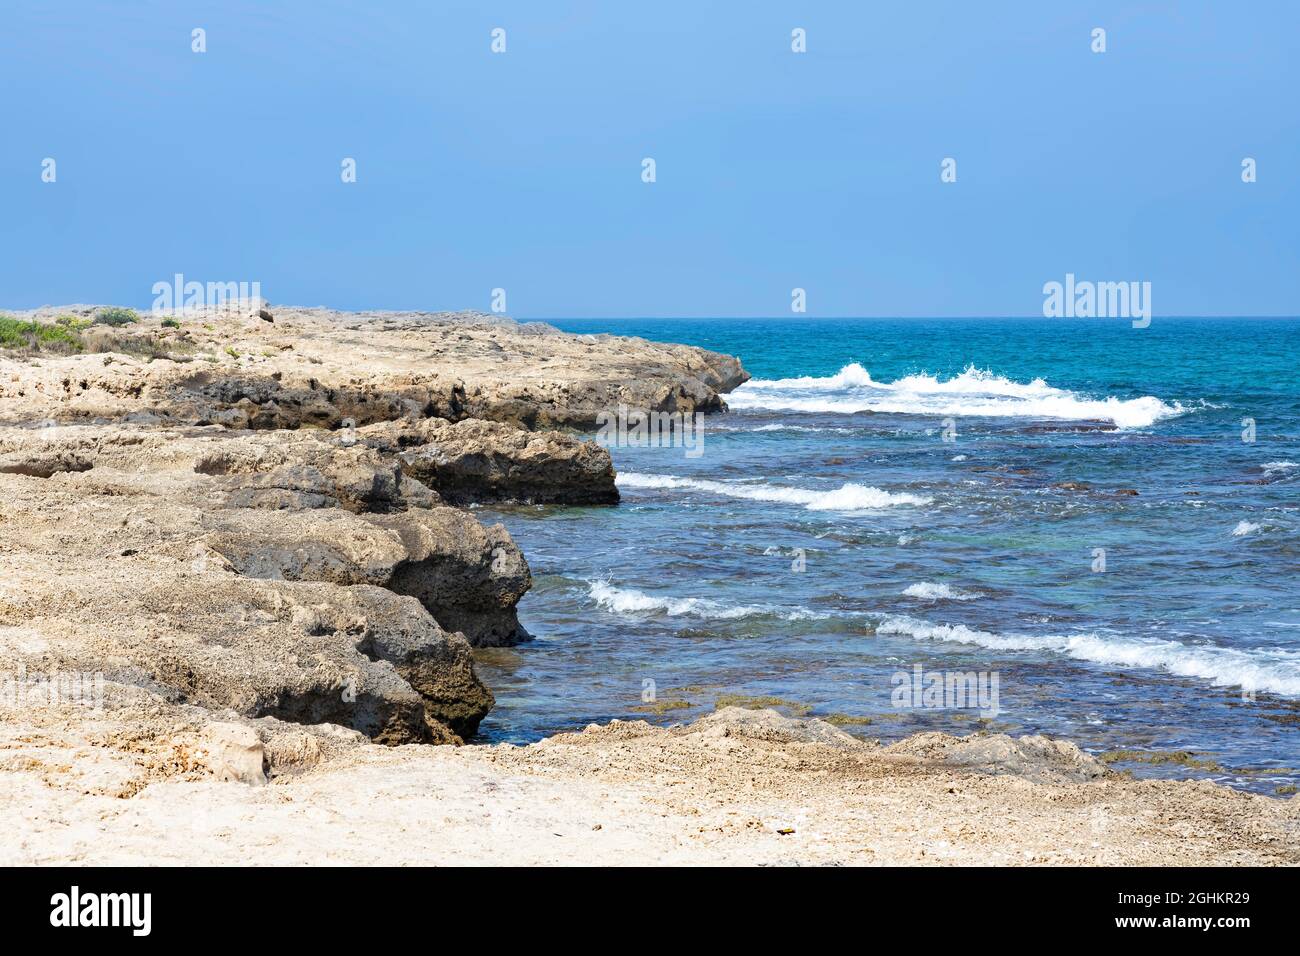 View of sandstone formations on the Mediterranean sea coast at low tide. Israel Stock Photo